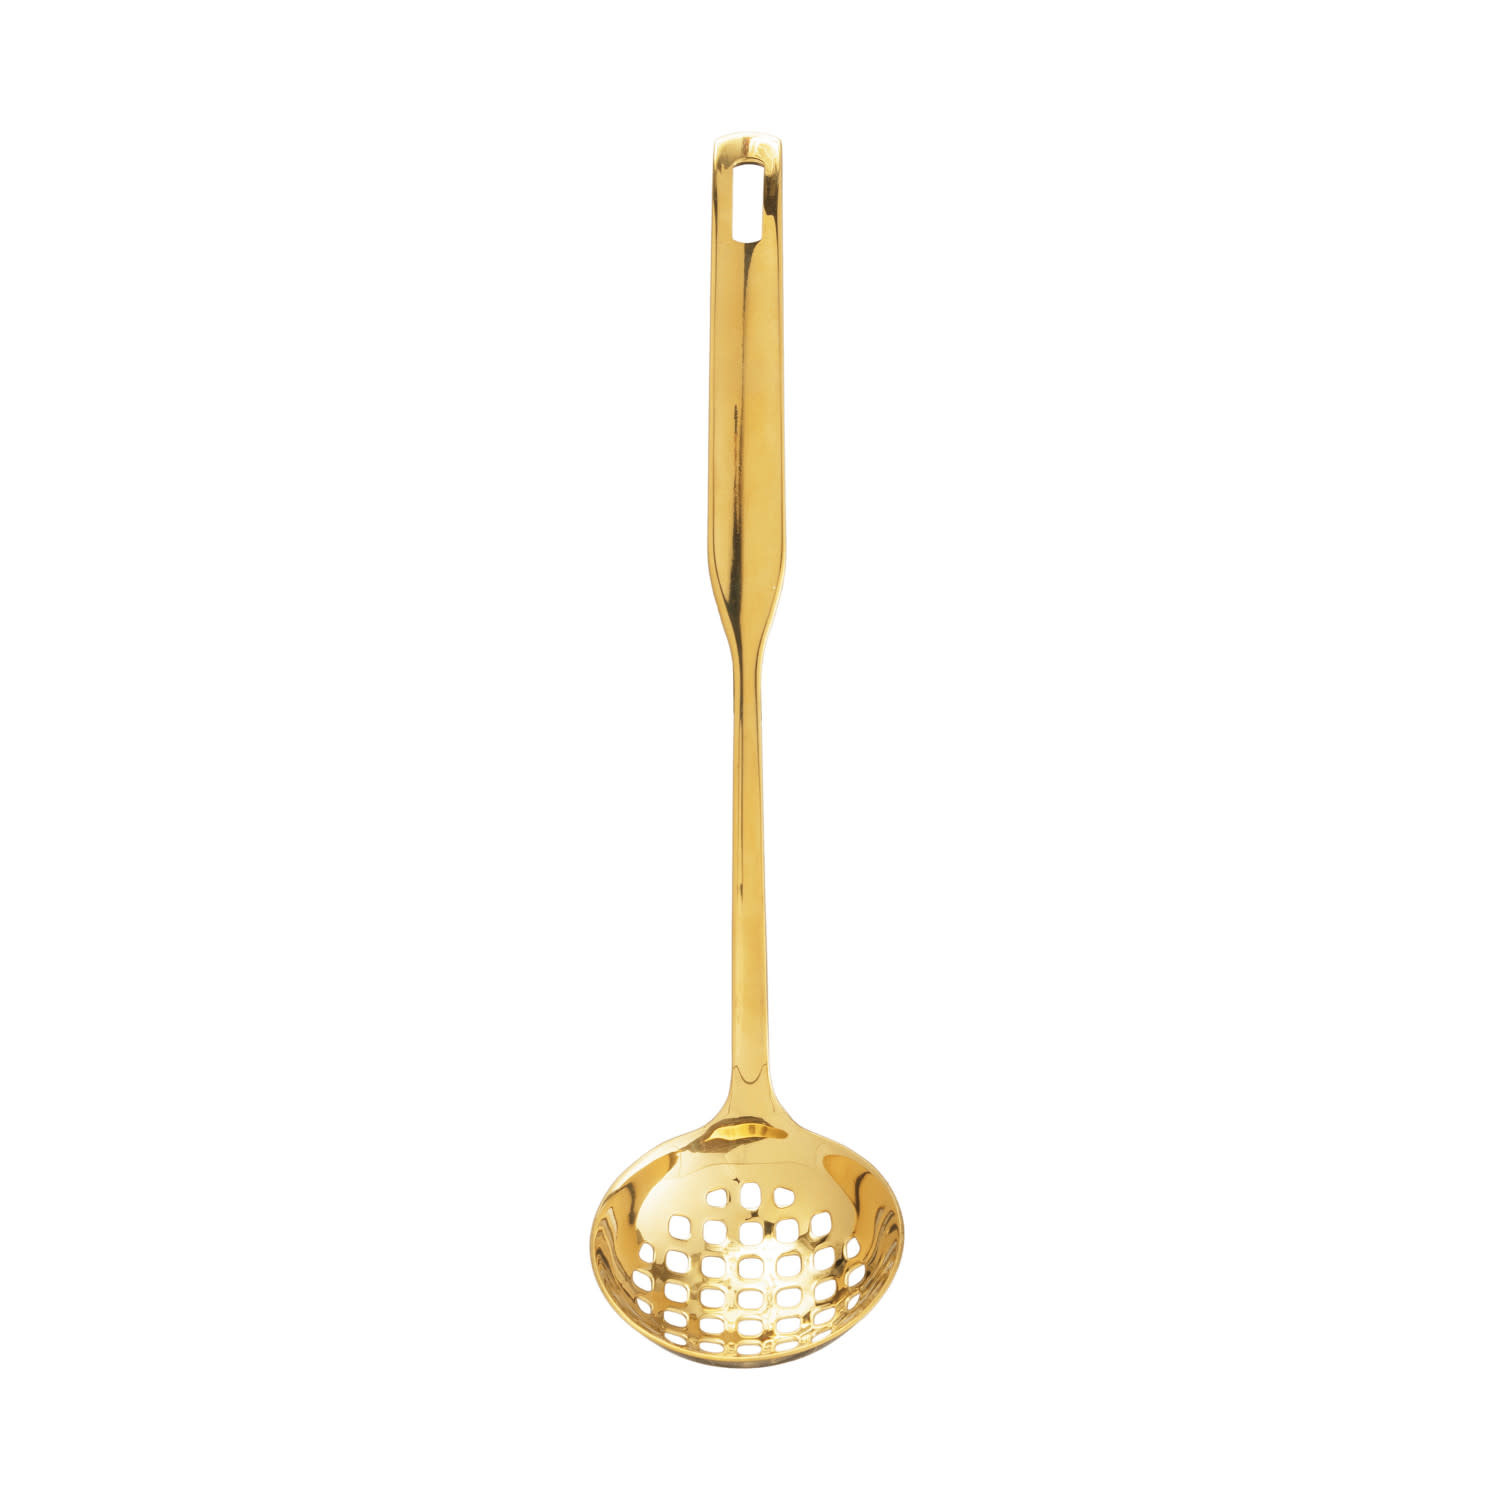 Stainless Steel Slotted Ladle, Gold Finish, 10"